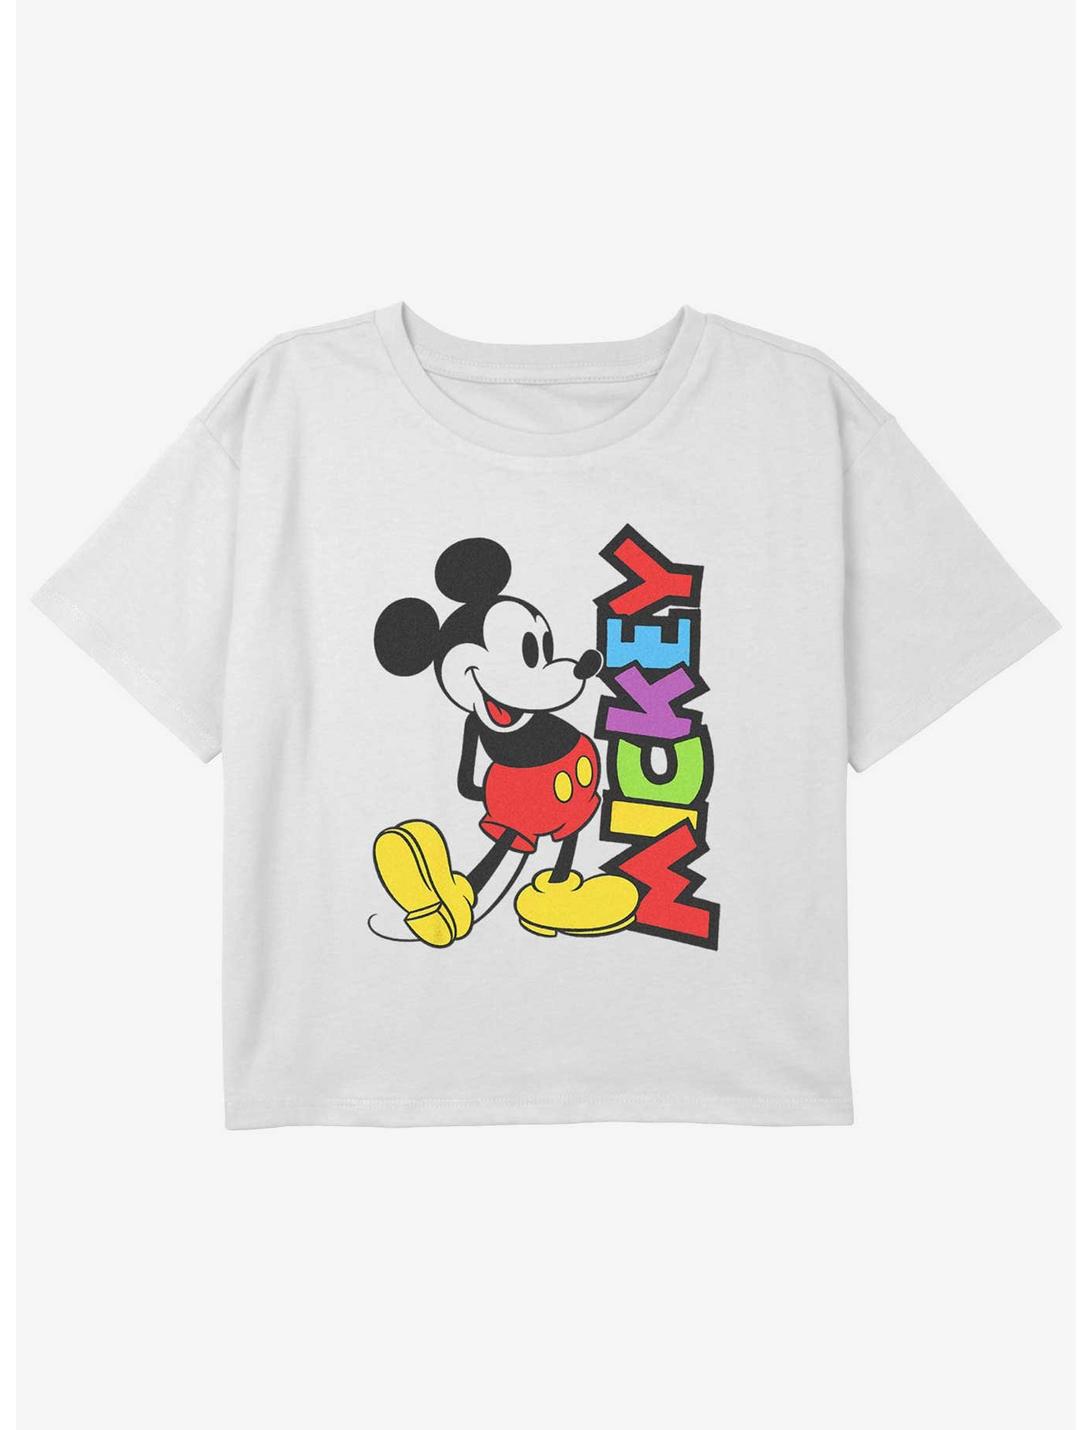 Disney Mickey Mouse Bright Mickey Girls Youth Crop T-Shirt, WHITE, hi-res